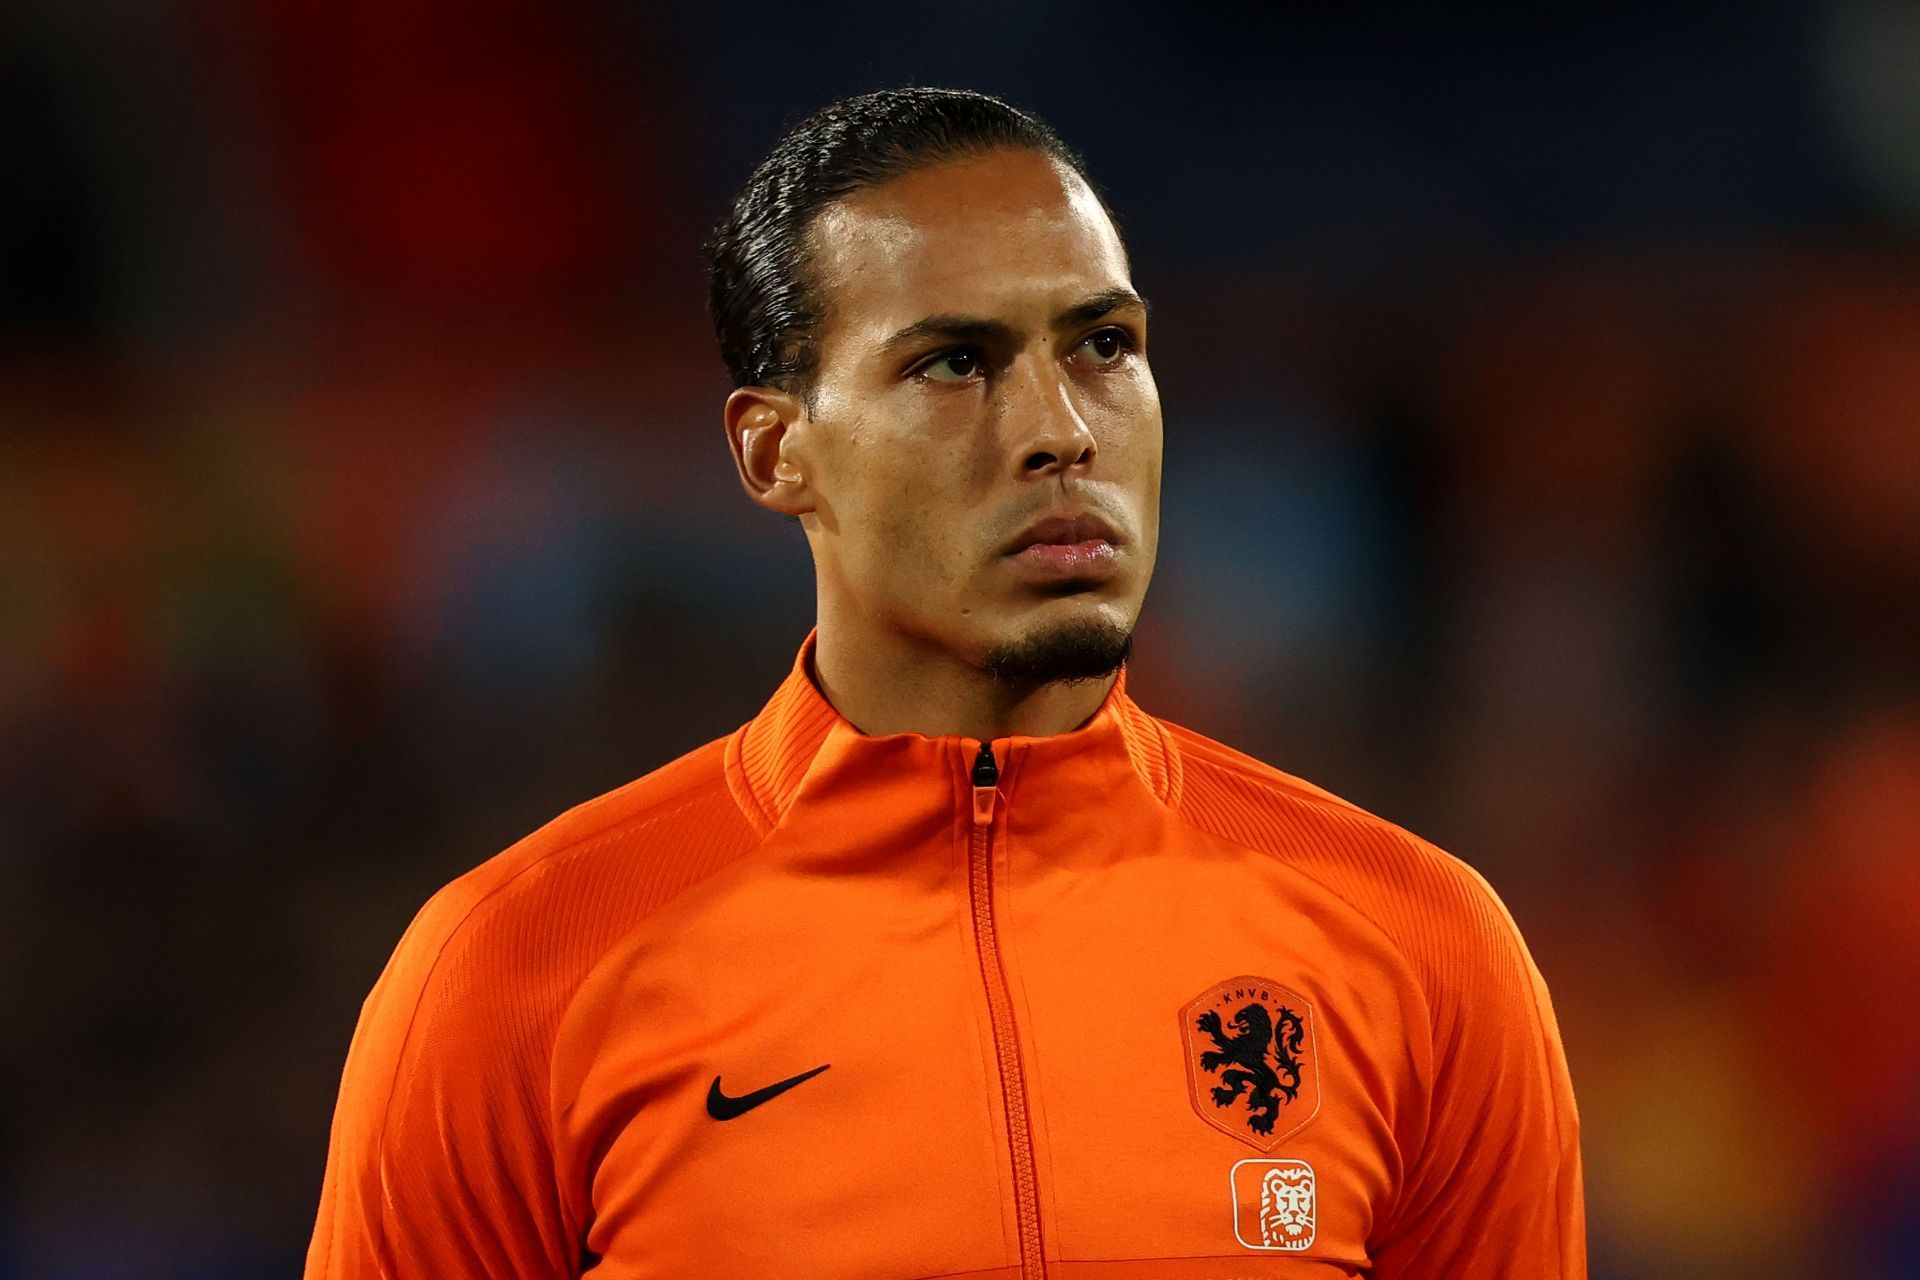 Virgil van Dijk is one of the best defenders in the world at the moment.